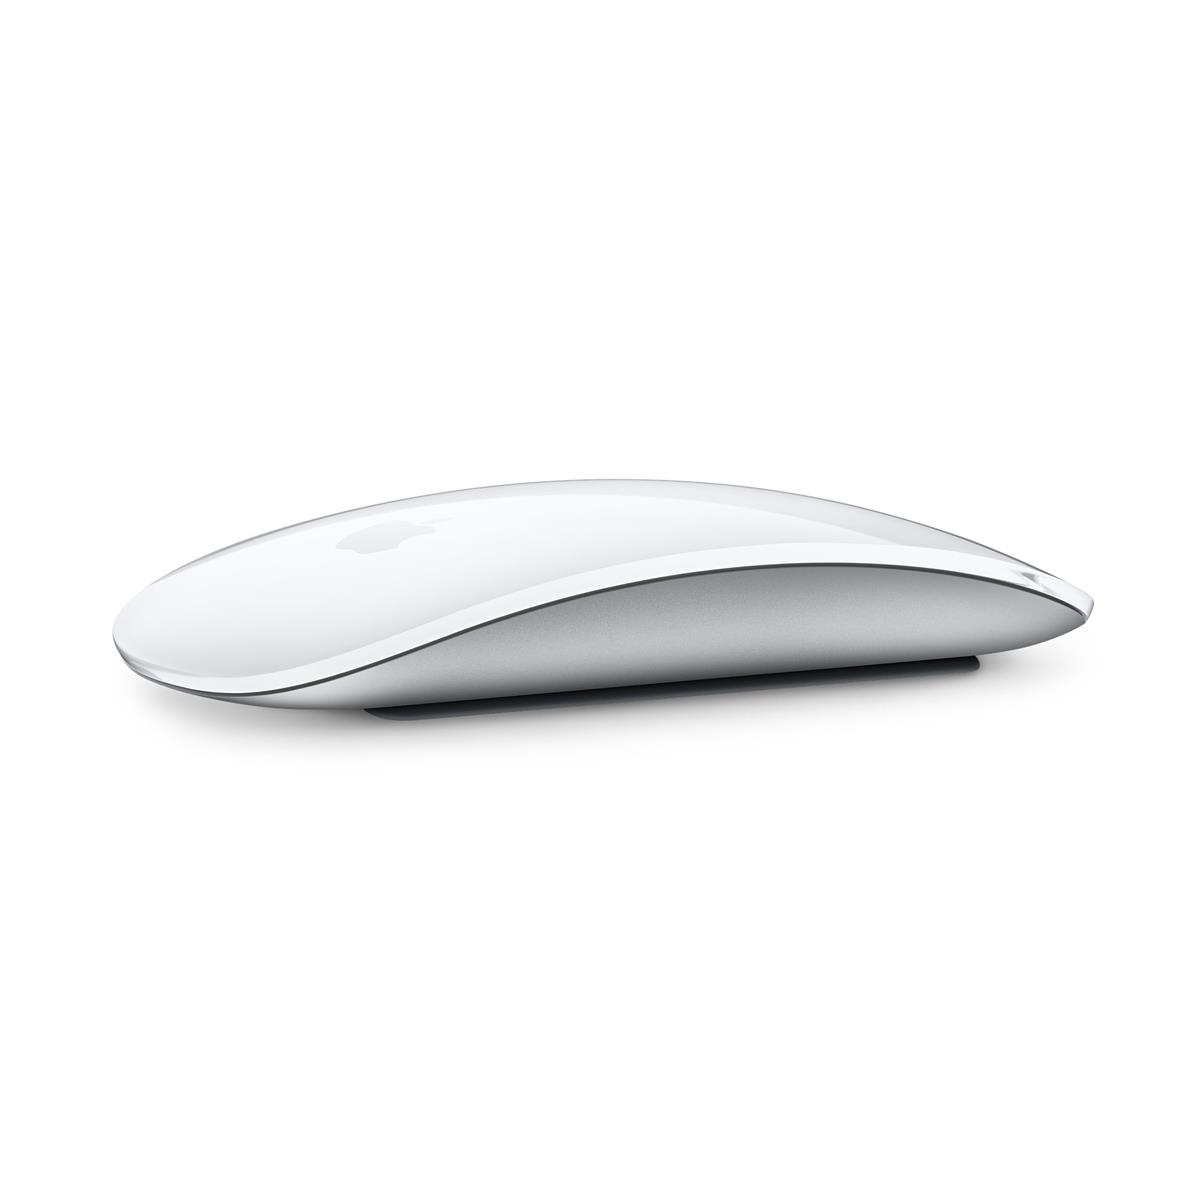 Image of Apple Magic Mouse for Apple iPad and Mac